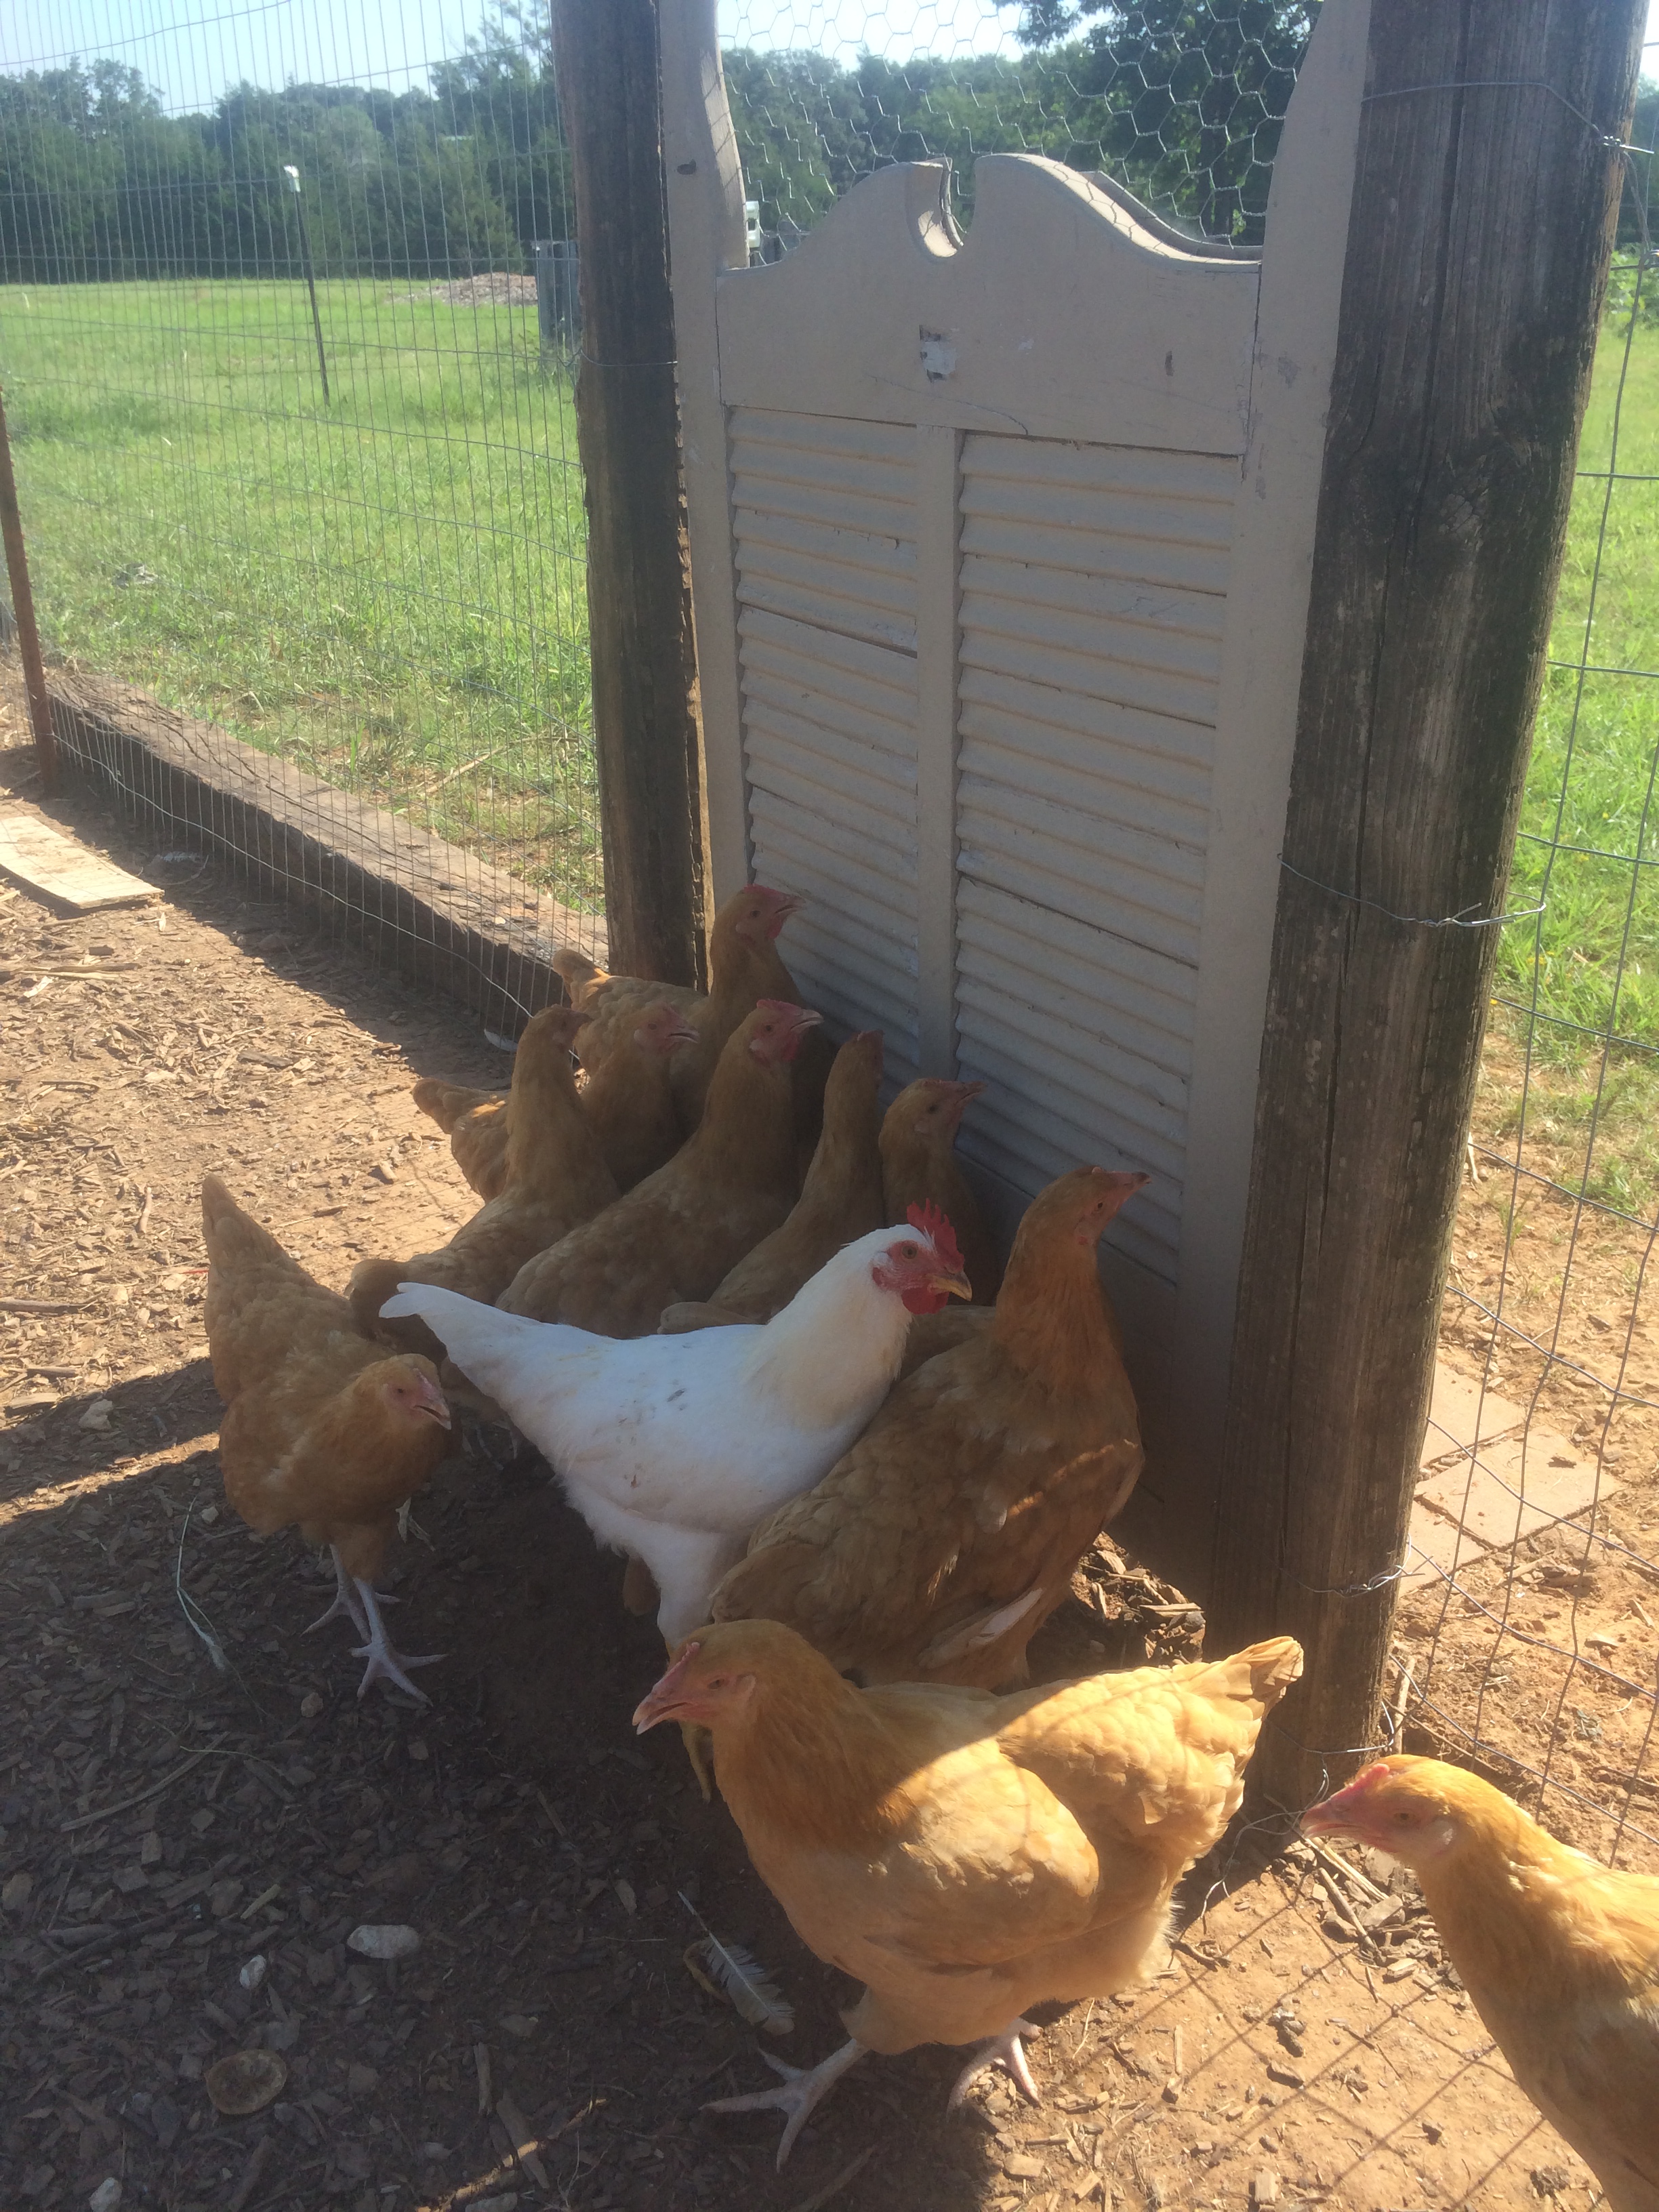 They love to get out and roam the property. We lock our dogs up (in the front half of the coop!) in the evenings and let the chickens roam free for a couple of hours. When they come in at dark, we lock them in the coop and release the dogs.